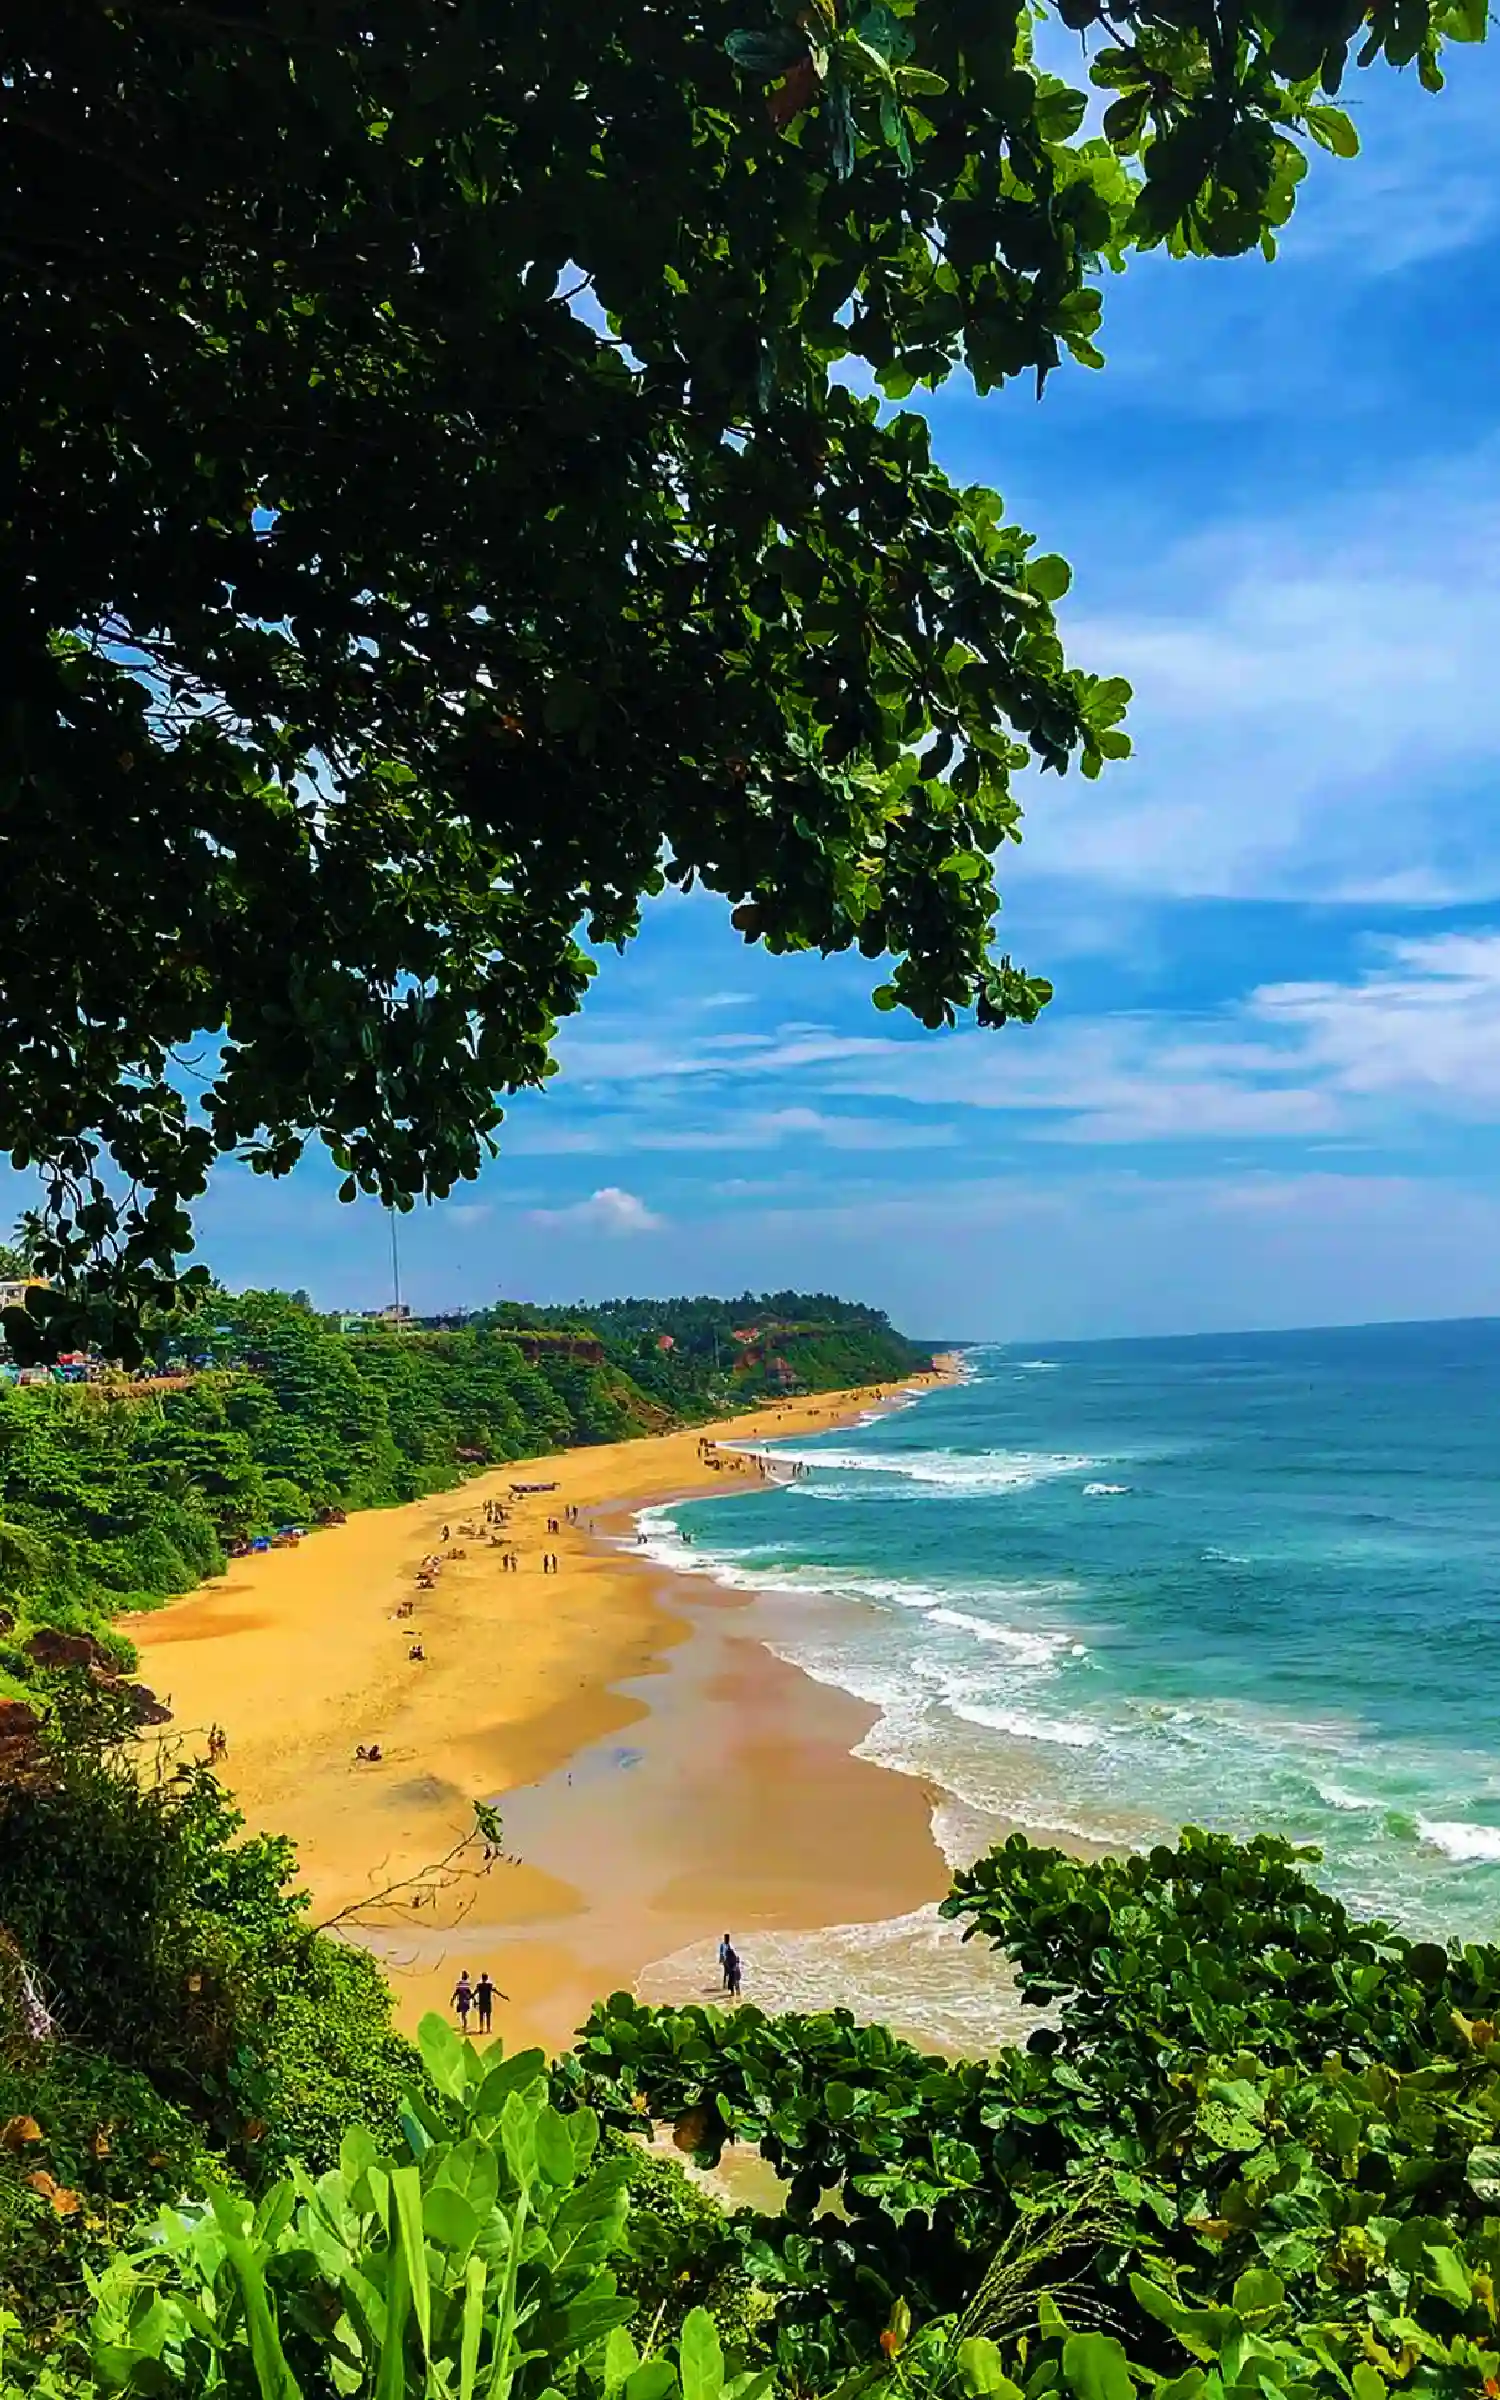 Kerala Tour Package with Kovalam and Varkala for 7 Days